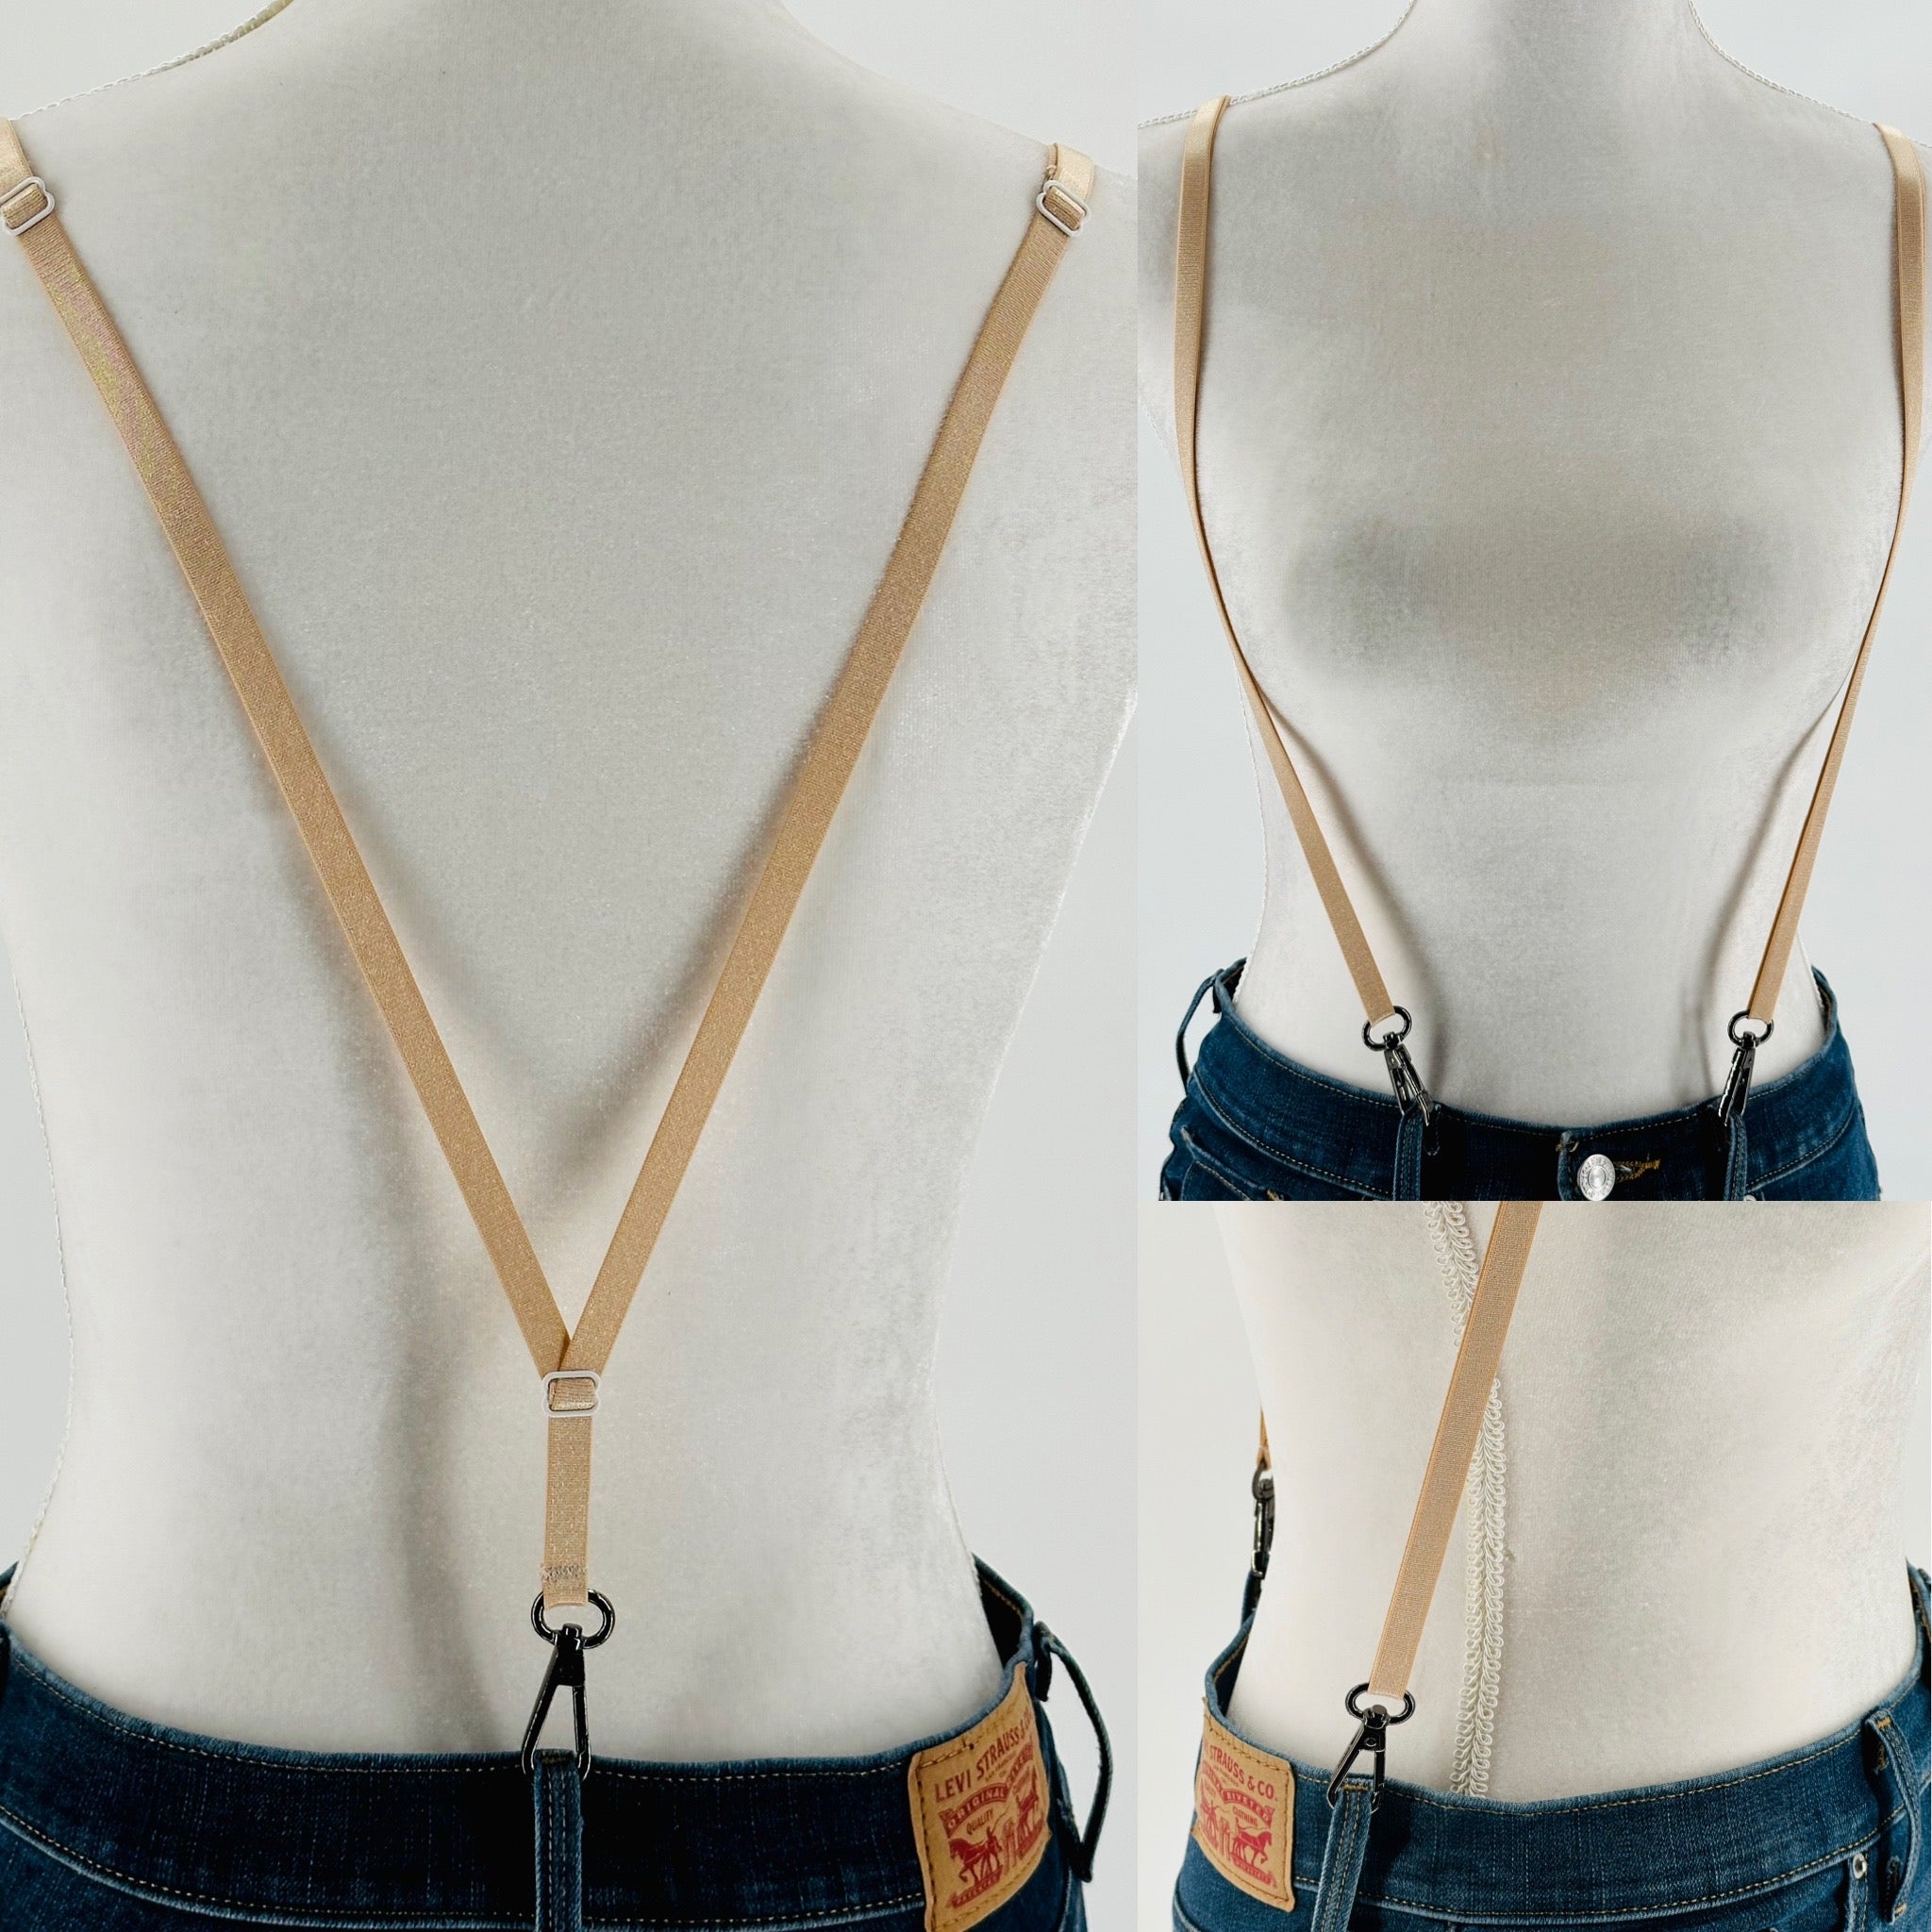 Women's Undergarment Suspenders with Swivel Hooks for Pants with